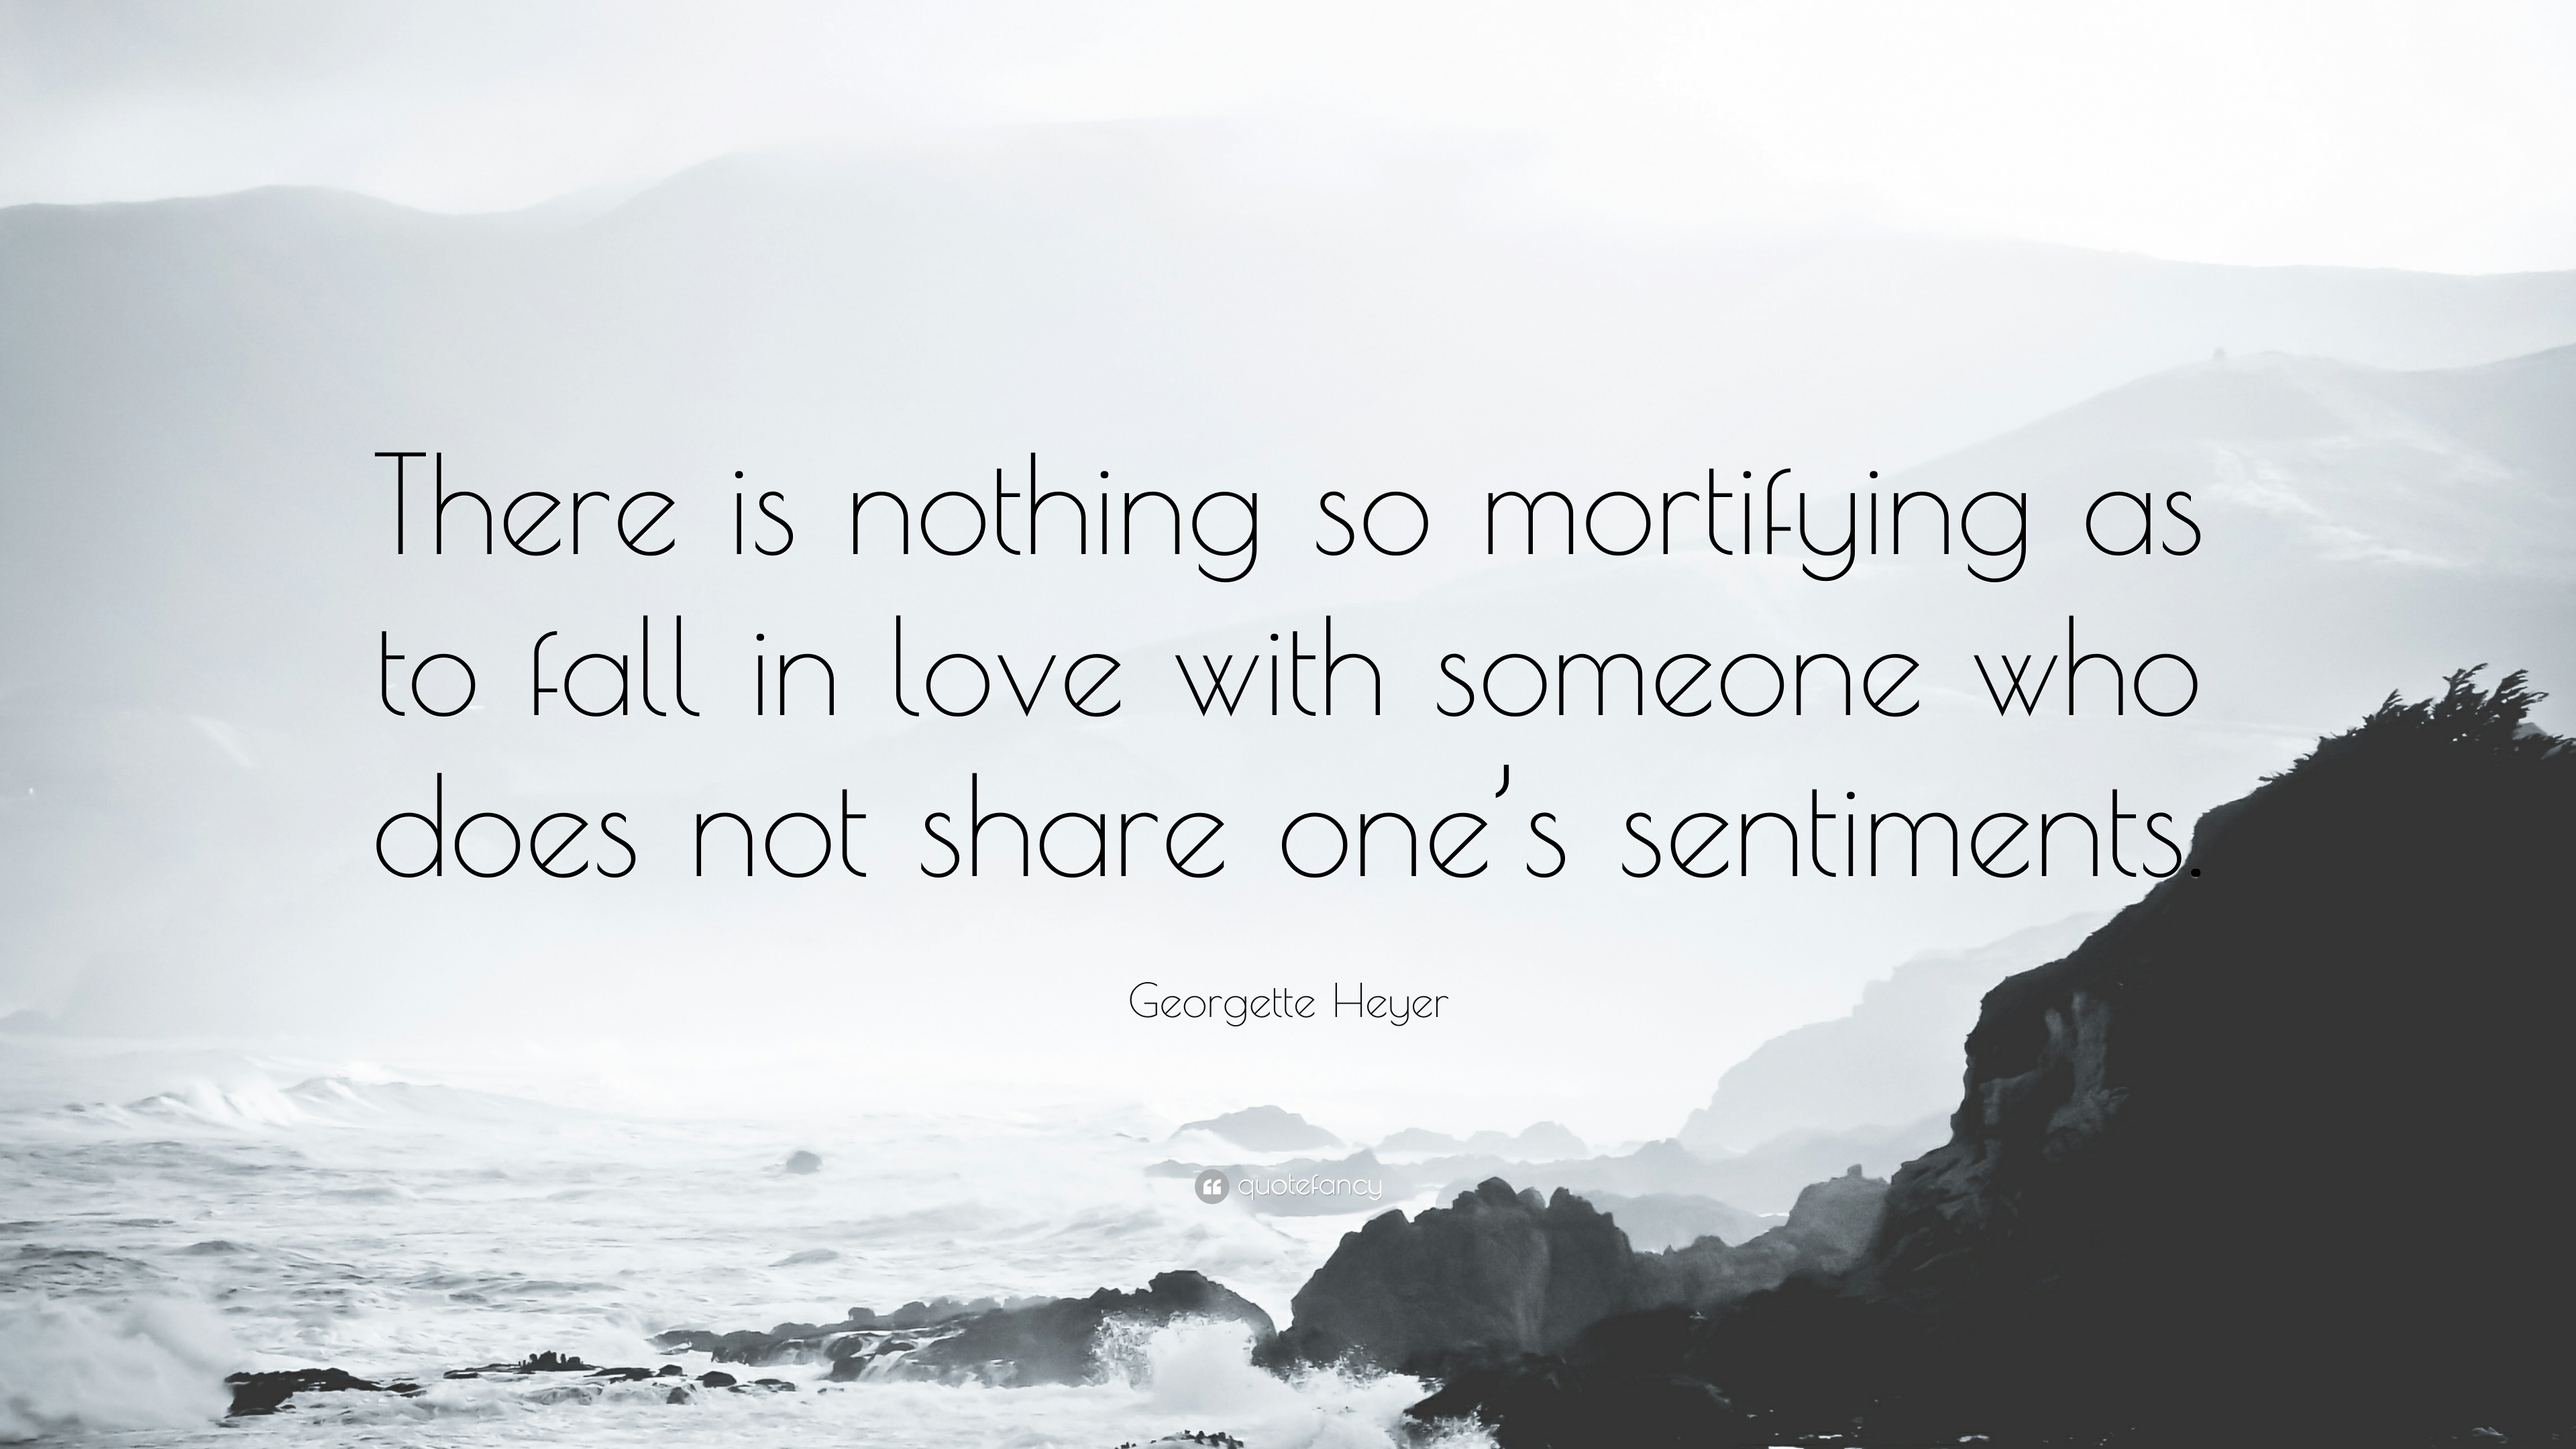 18 Of The Greatest, Most Powerful Quotes About Unrequited Love